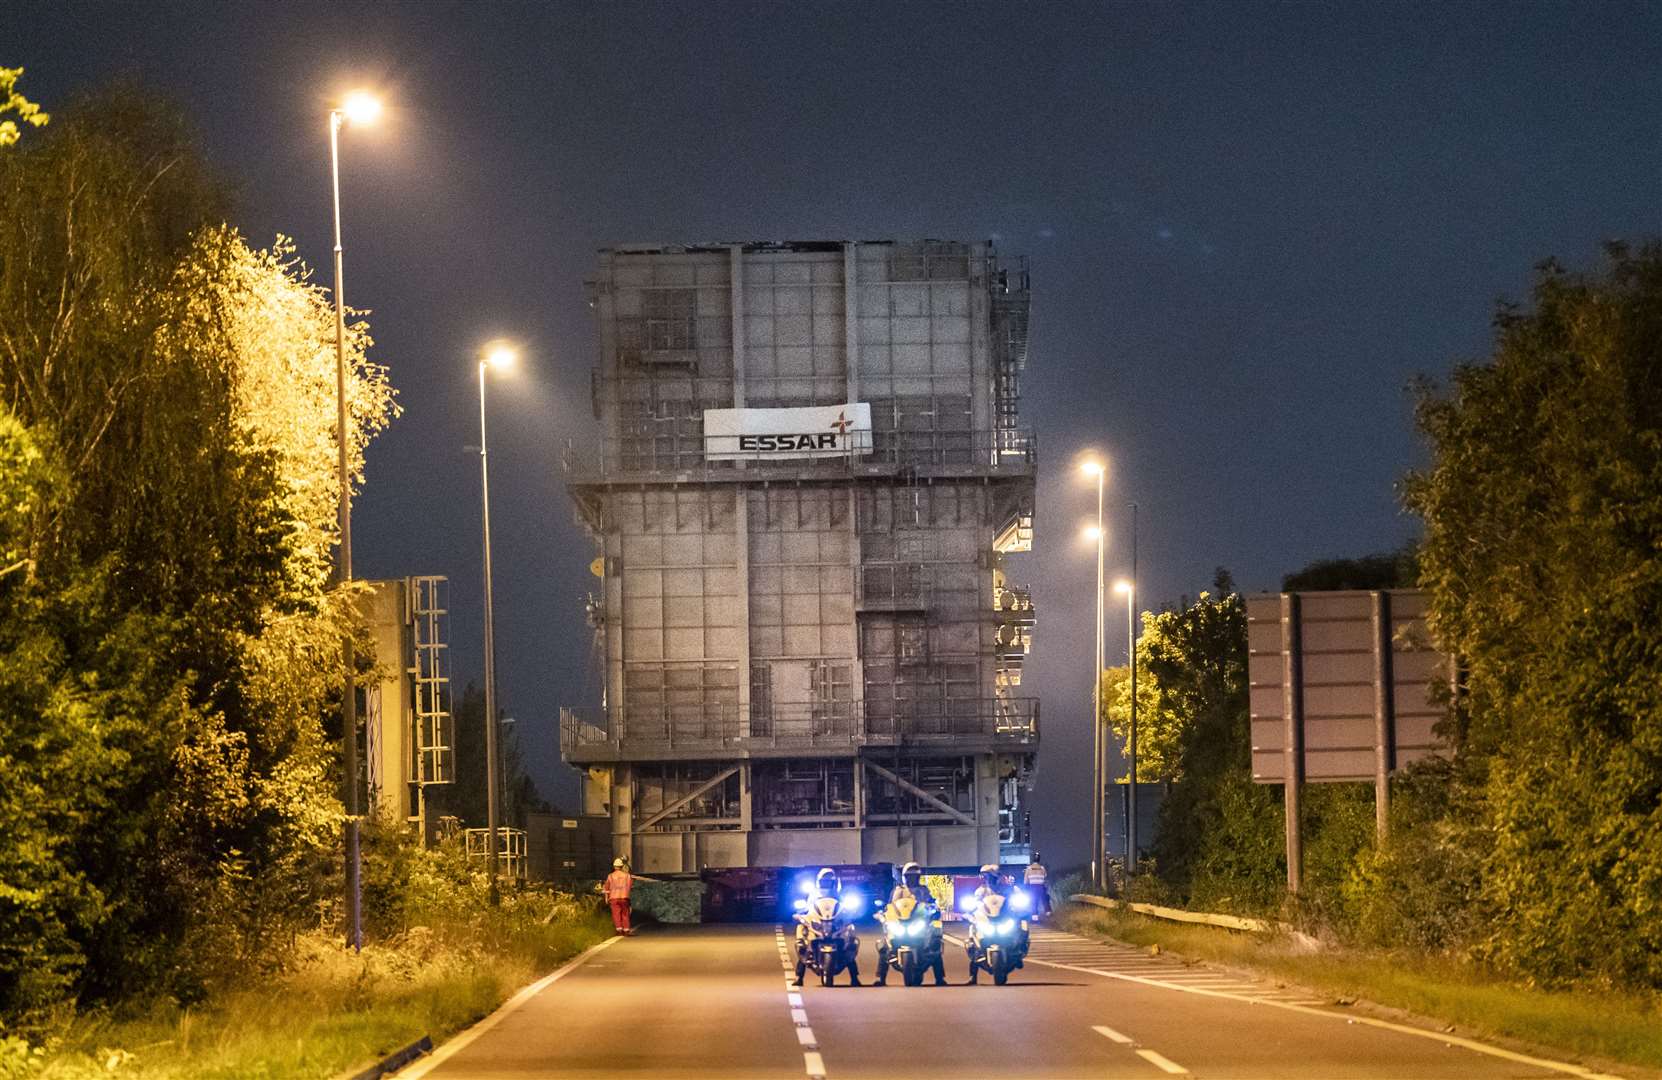 The journey took several hours as the lorries moved at walking pace (Danny Lawson/PA)